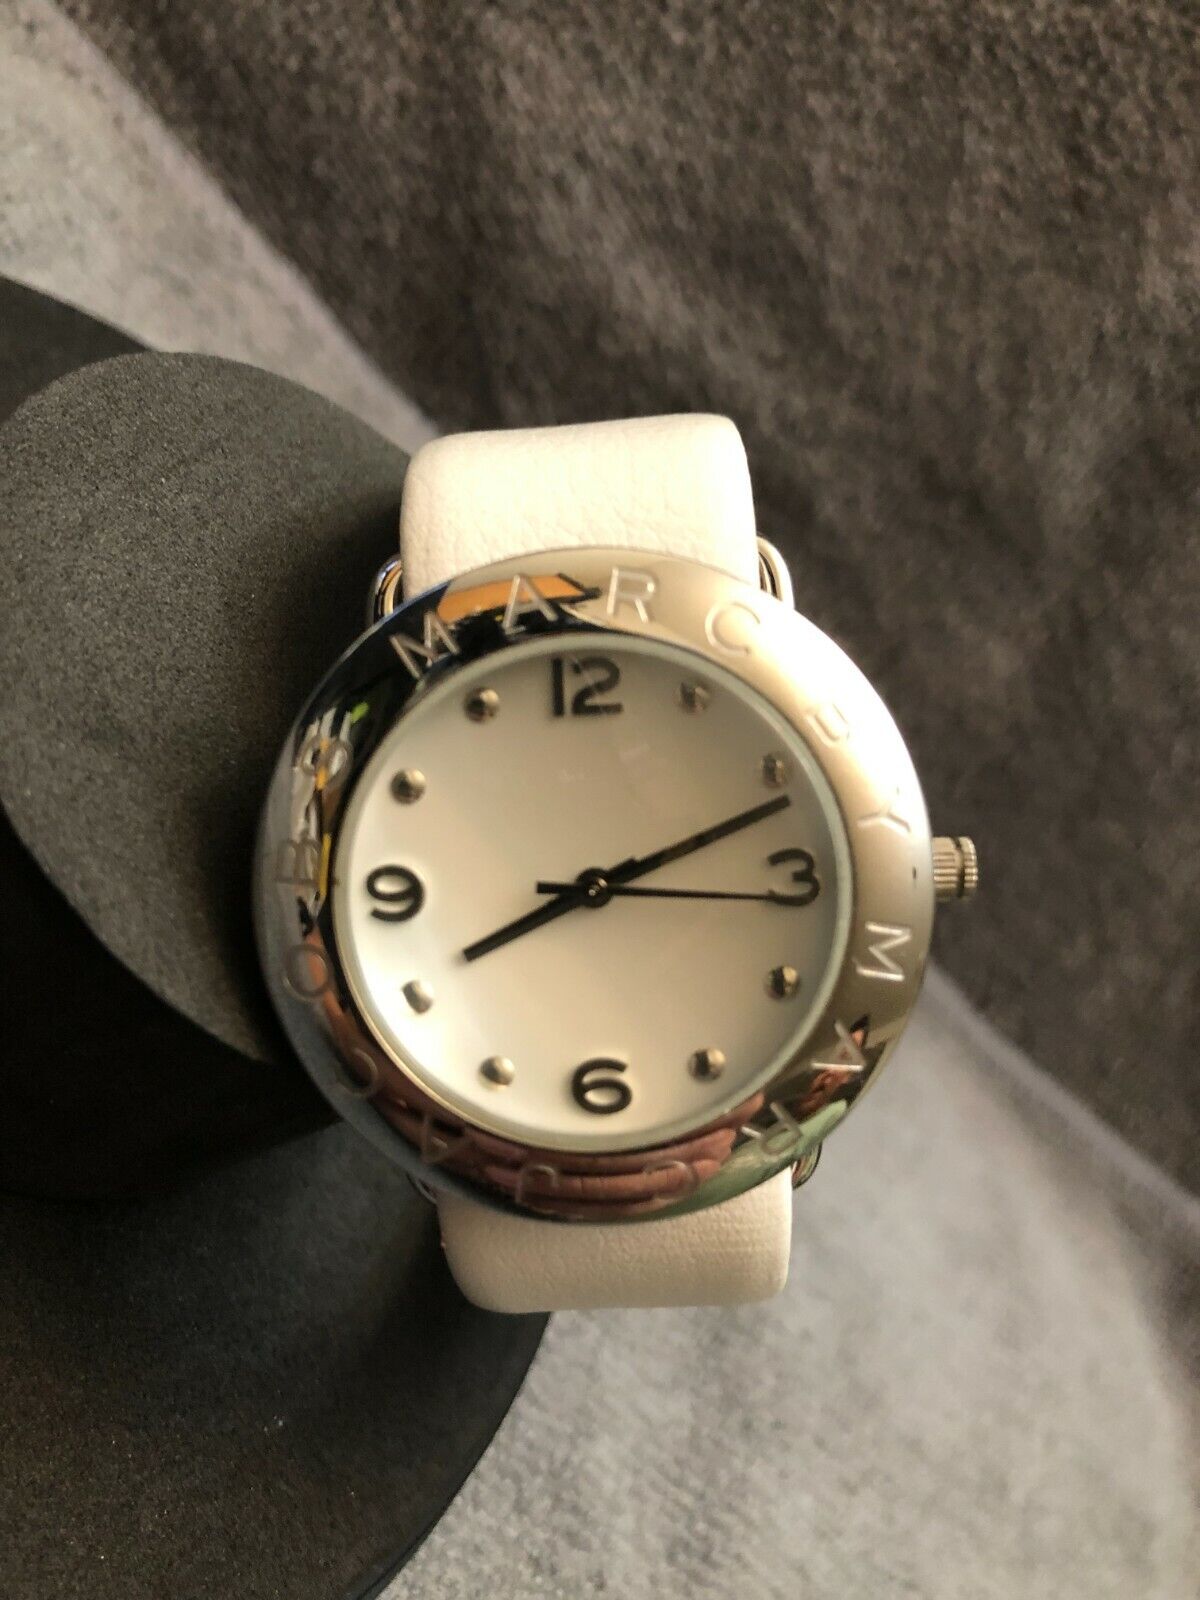 Marc Jacobs Amy White Dial White Leather Strap Watch for Women - MBM1136